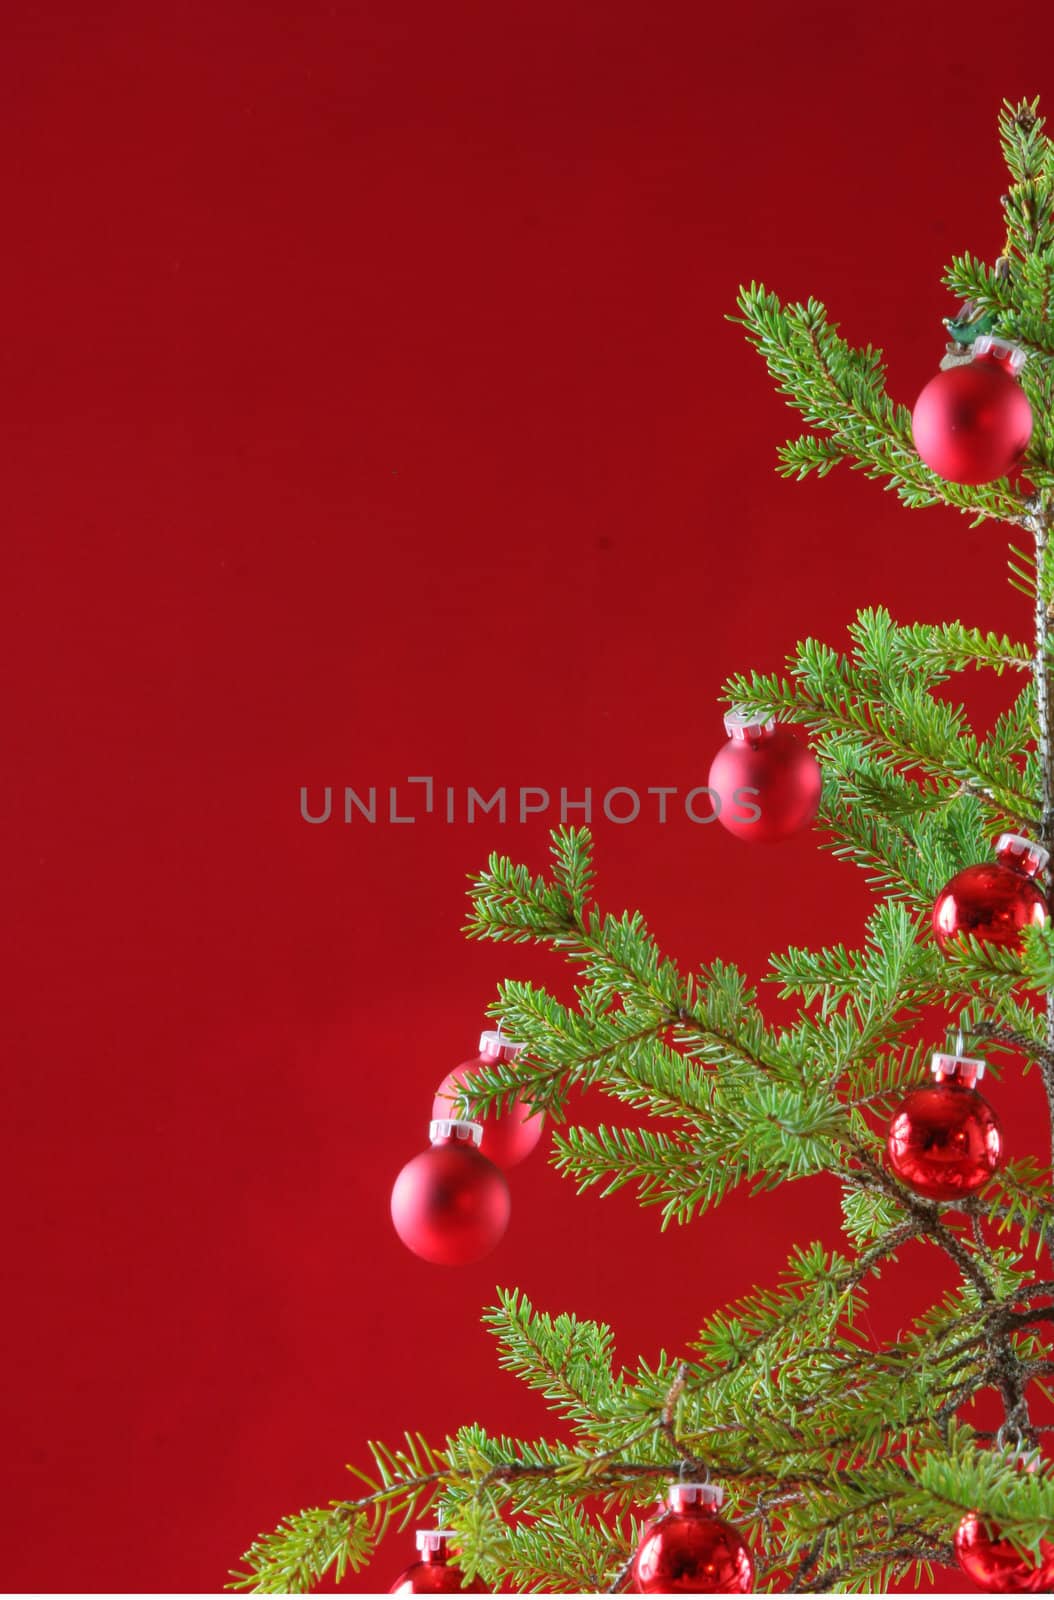 Miniature Christmas tree with miniature red ornaments and elegant rich dark red background.